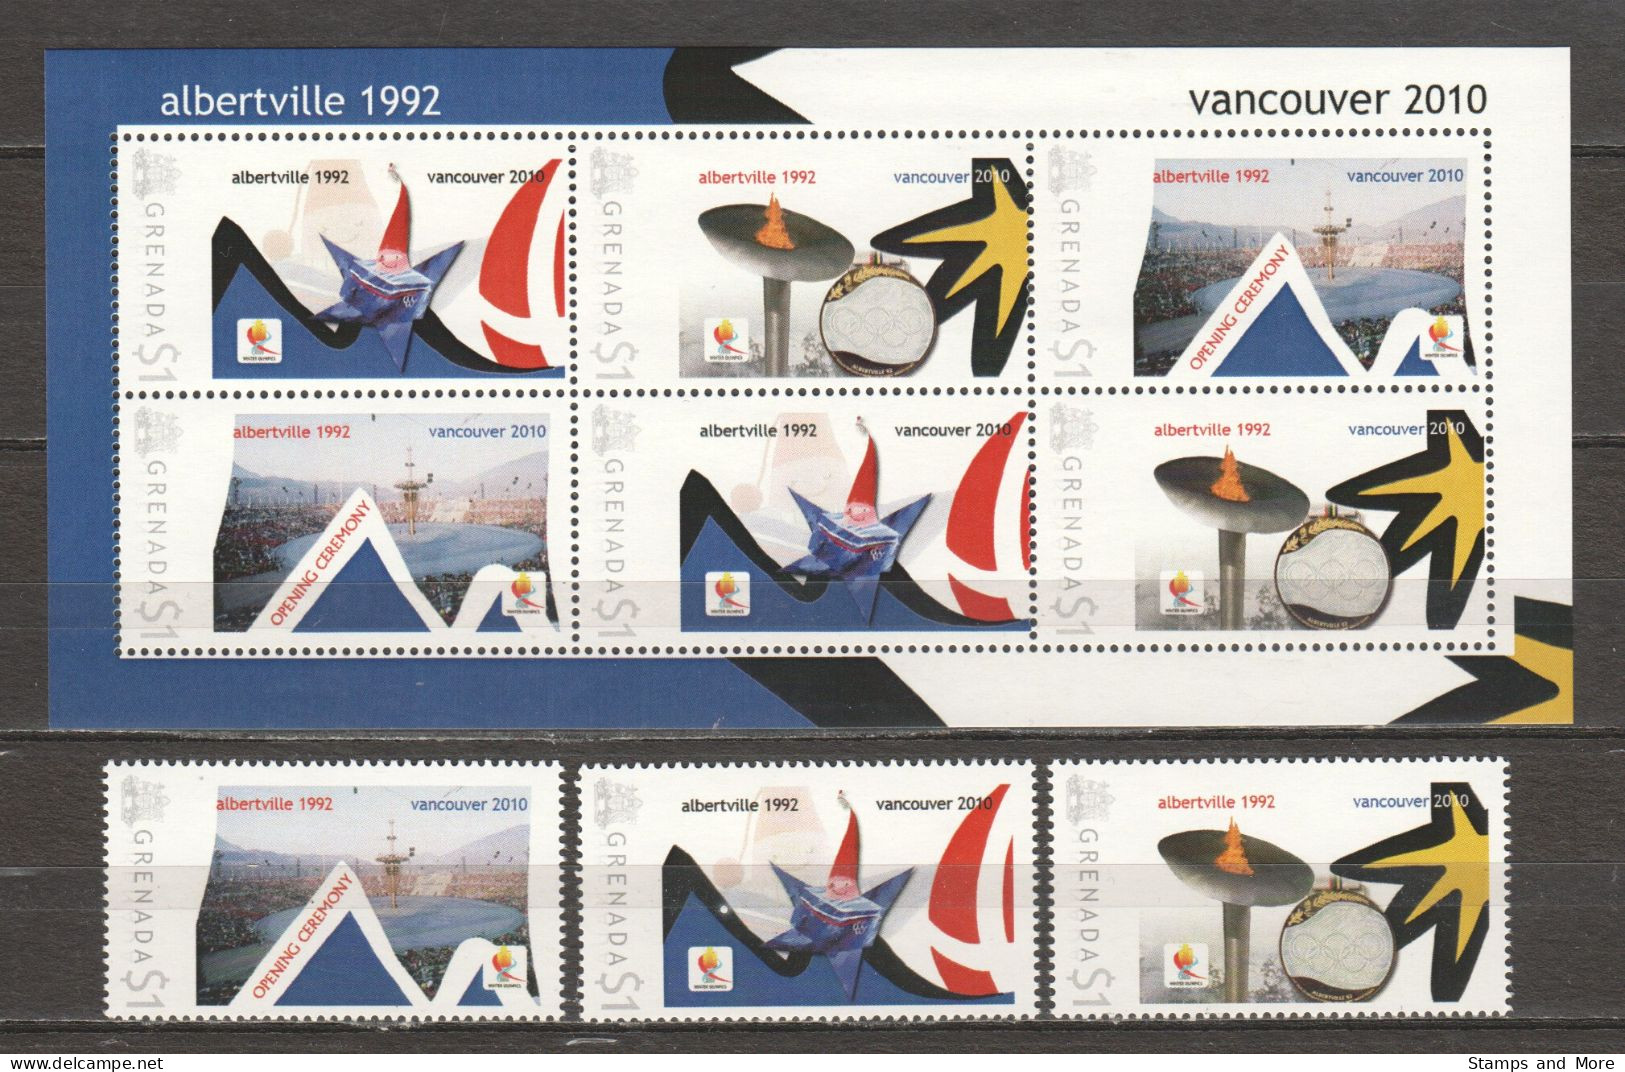 Grenada - Limited Edition Set 16 MNH - WINTER OLYMPICS VANCOUVER 2010 - ALBERTVILLE 1992 - Hiver 2010: Vancouver